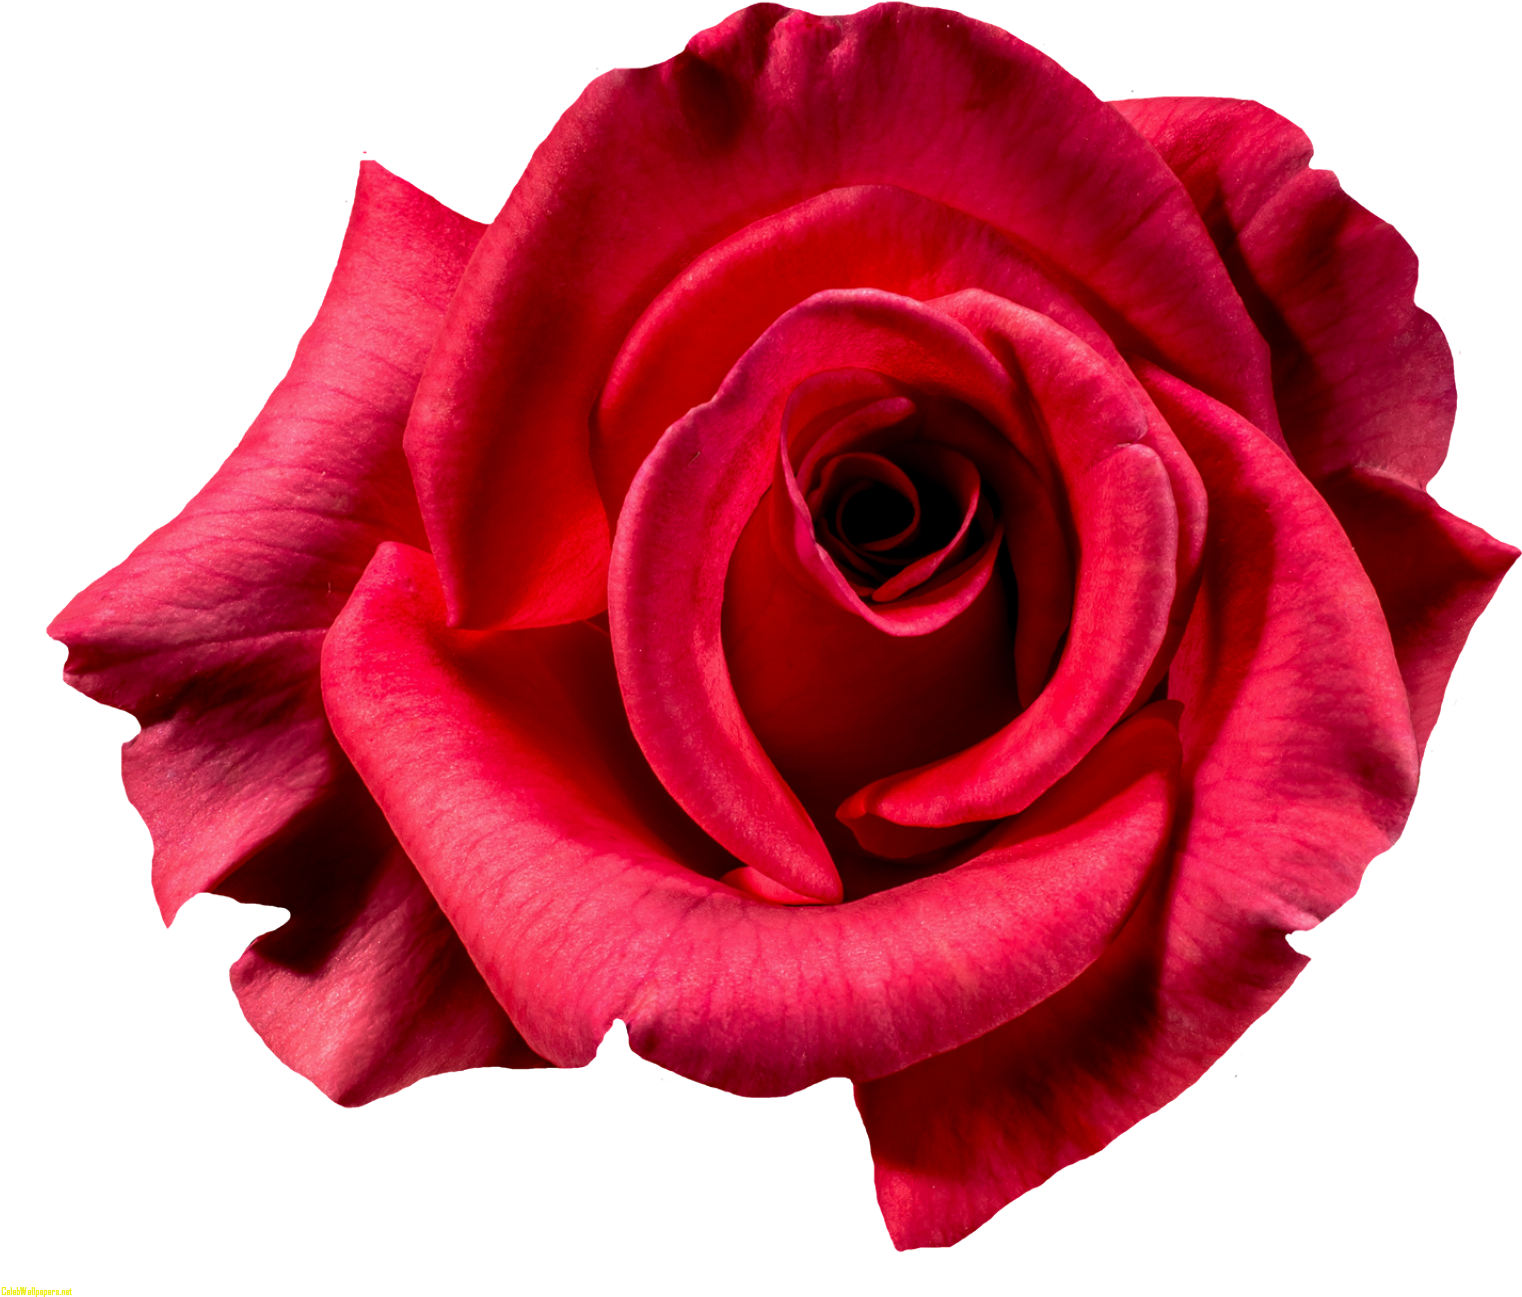 Flower Images Rose Pngpix Red Rose Flower Top View - Flower Top View Png (1600x1369)